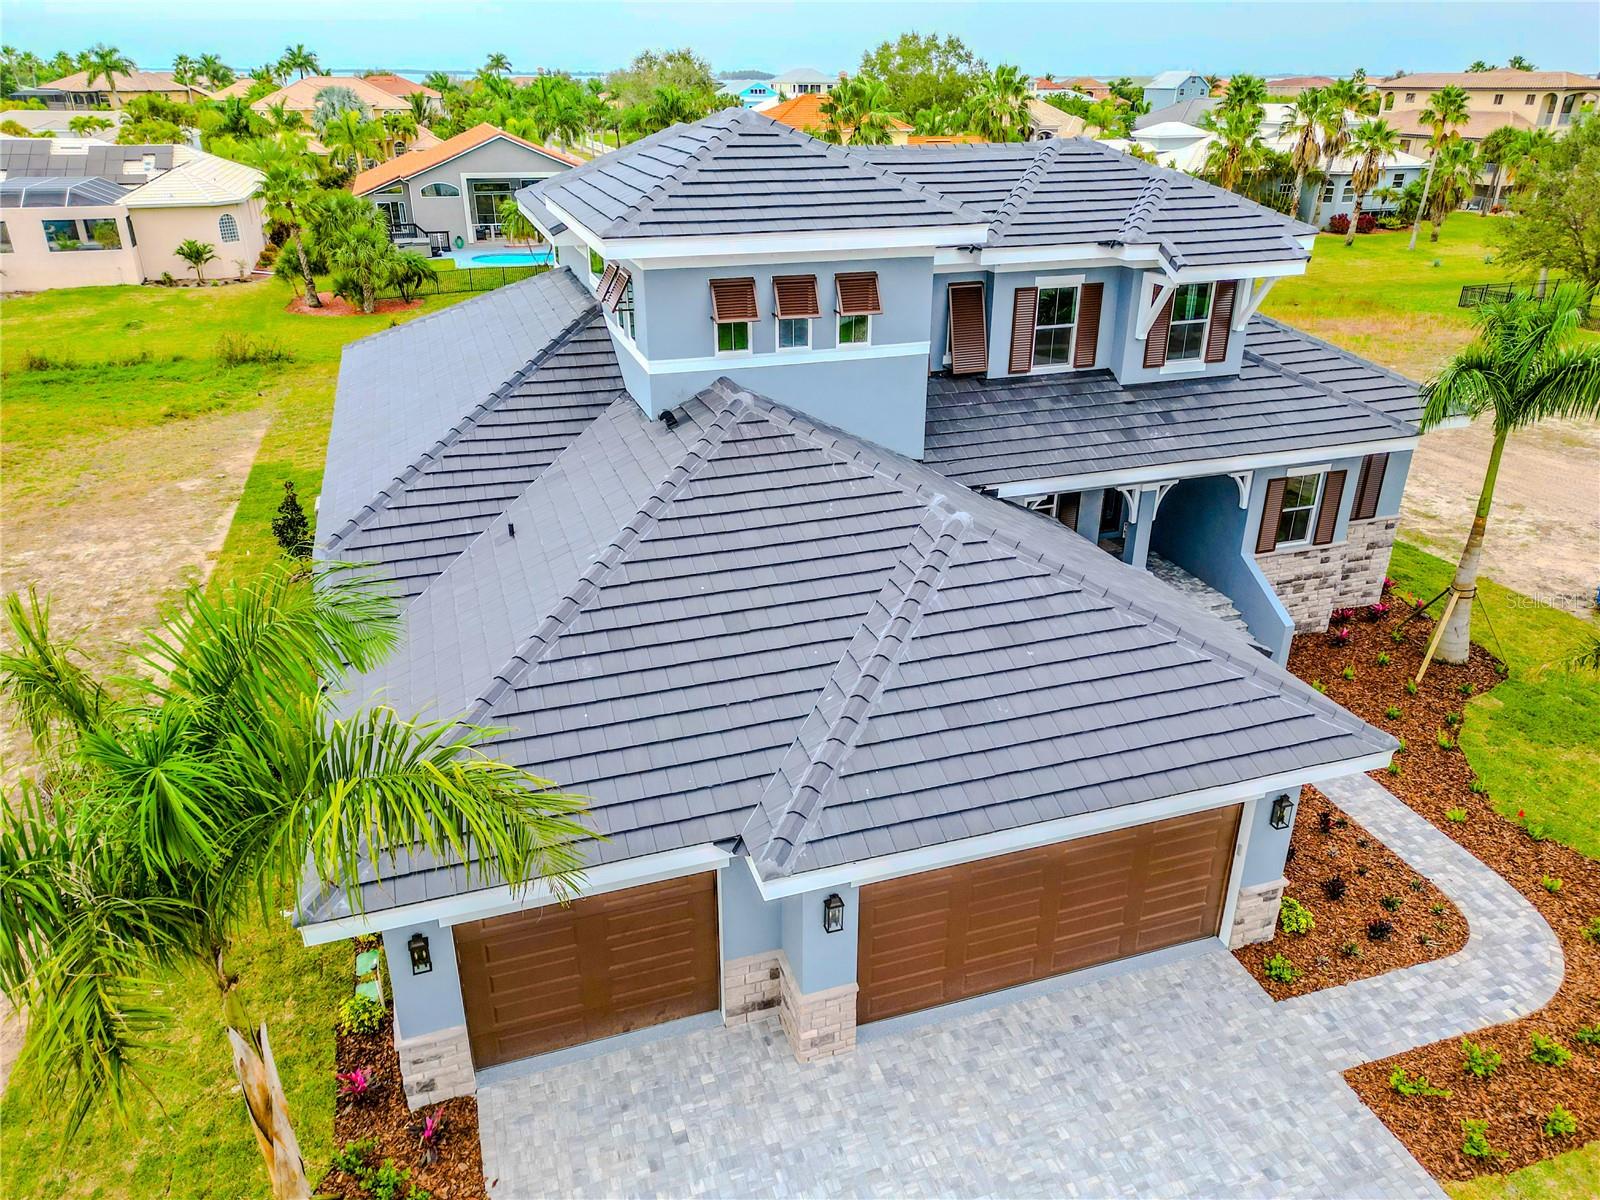 Details like the Bahama Shutters, Gabled roof line and Exterior Corbels add to the overall grandeur of this home.